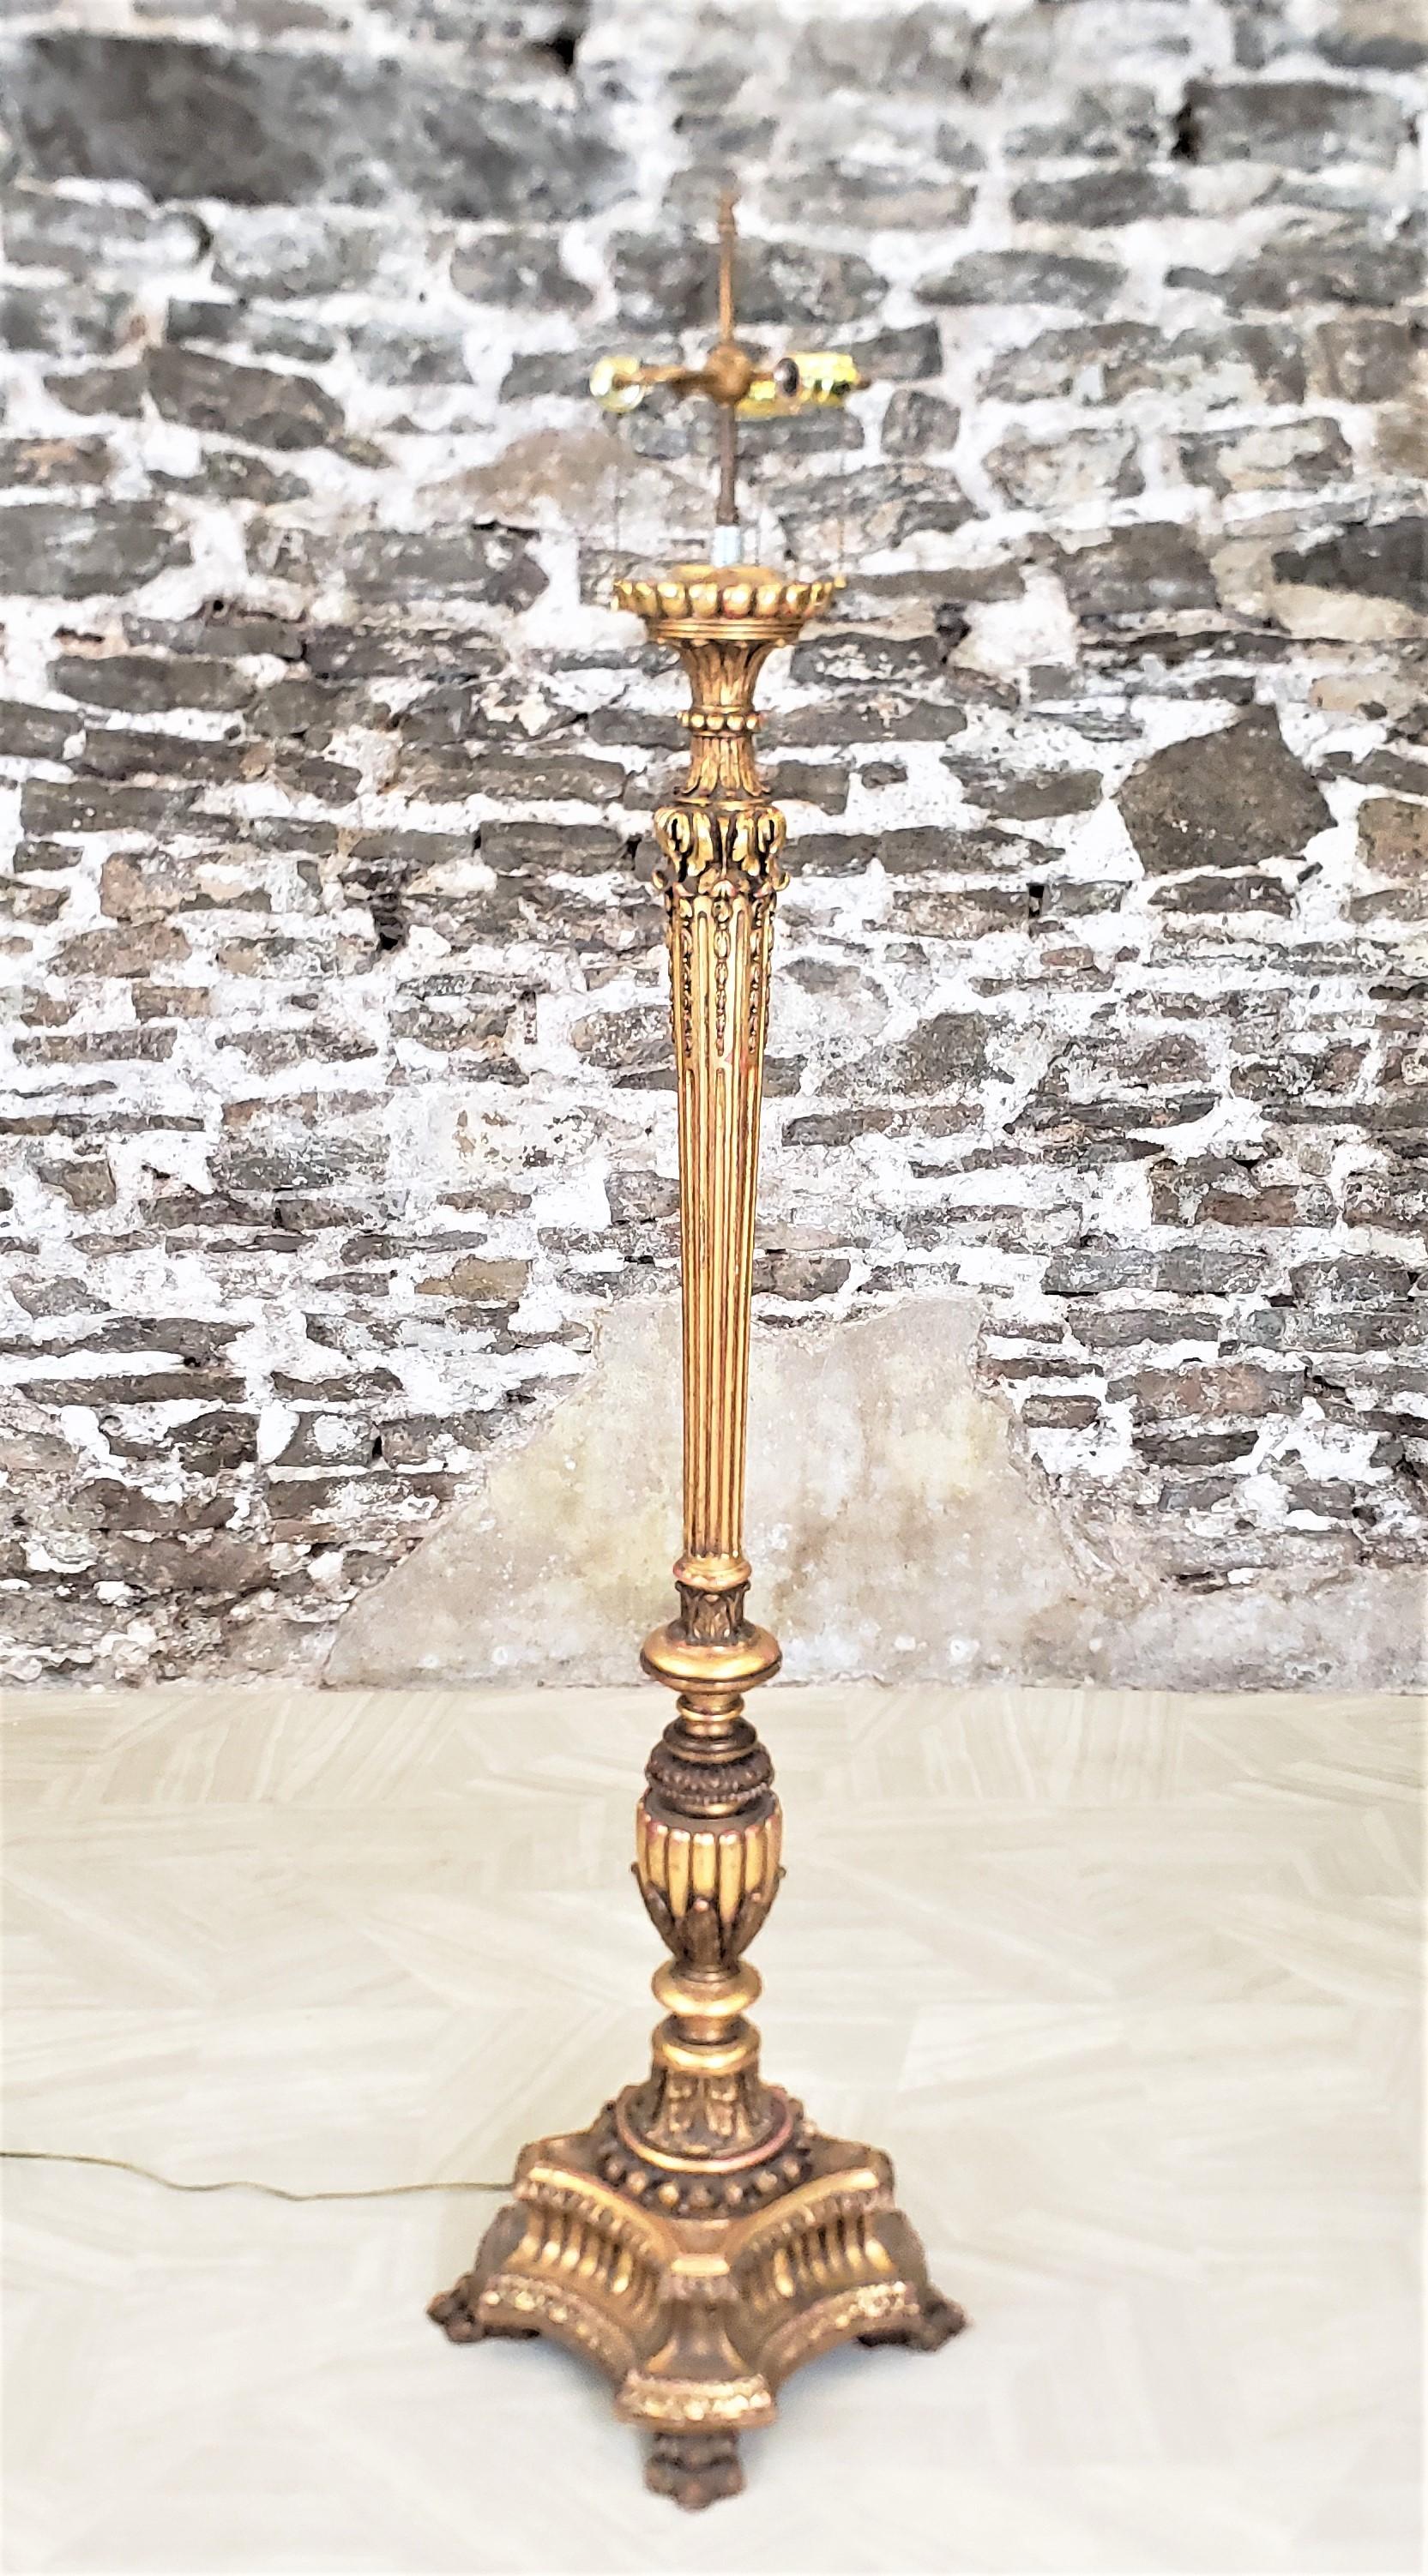 Antique Italian Florentine Hand-Carved & Gilt Finished Floor Lamp & Shade For Sale 3